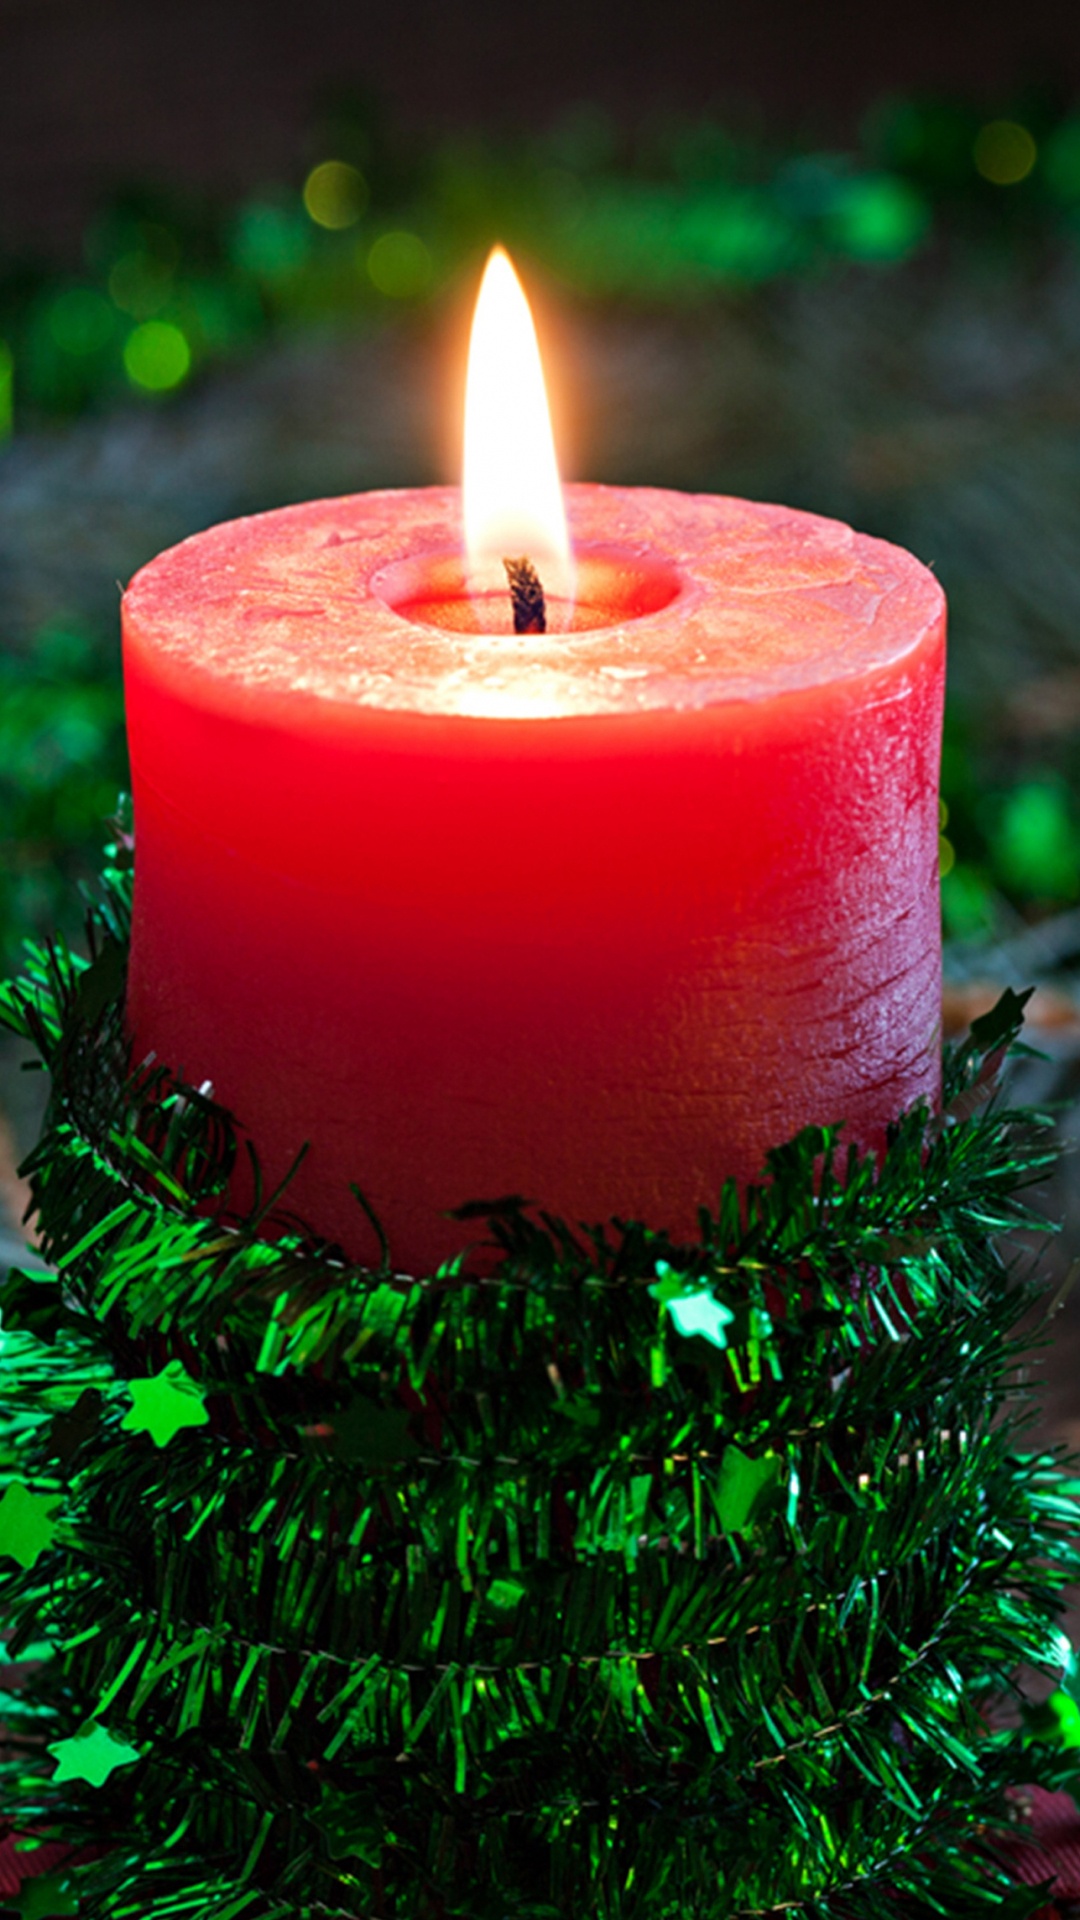 Candle, Green, Lighting, Christmas, Tree. Wallpaper in 1080x1920 Resolution